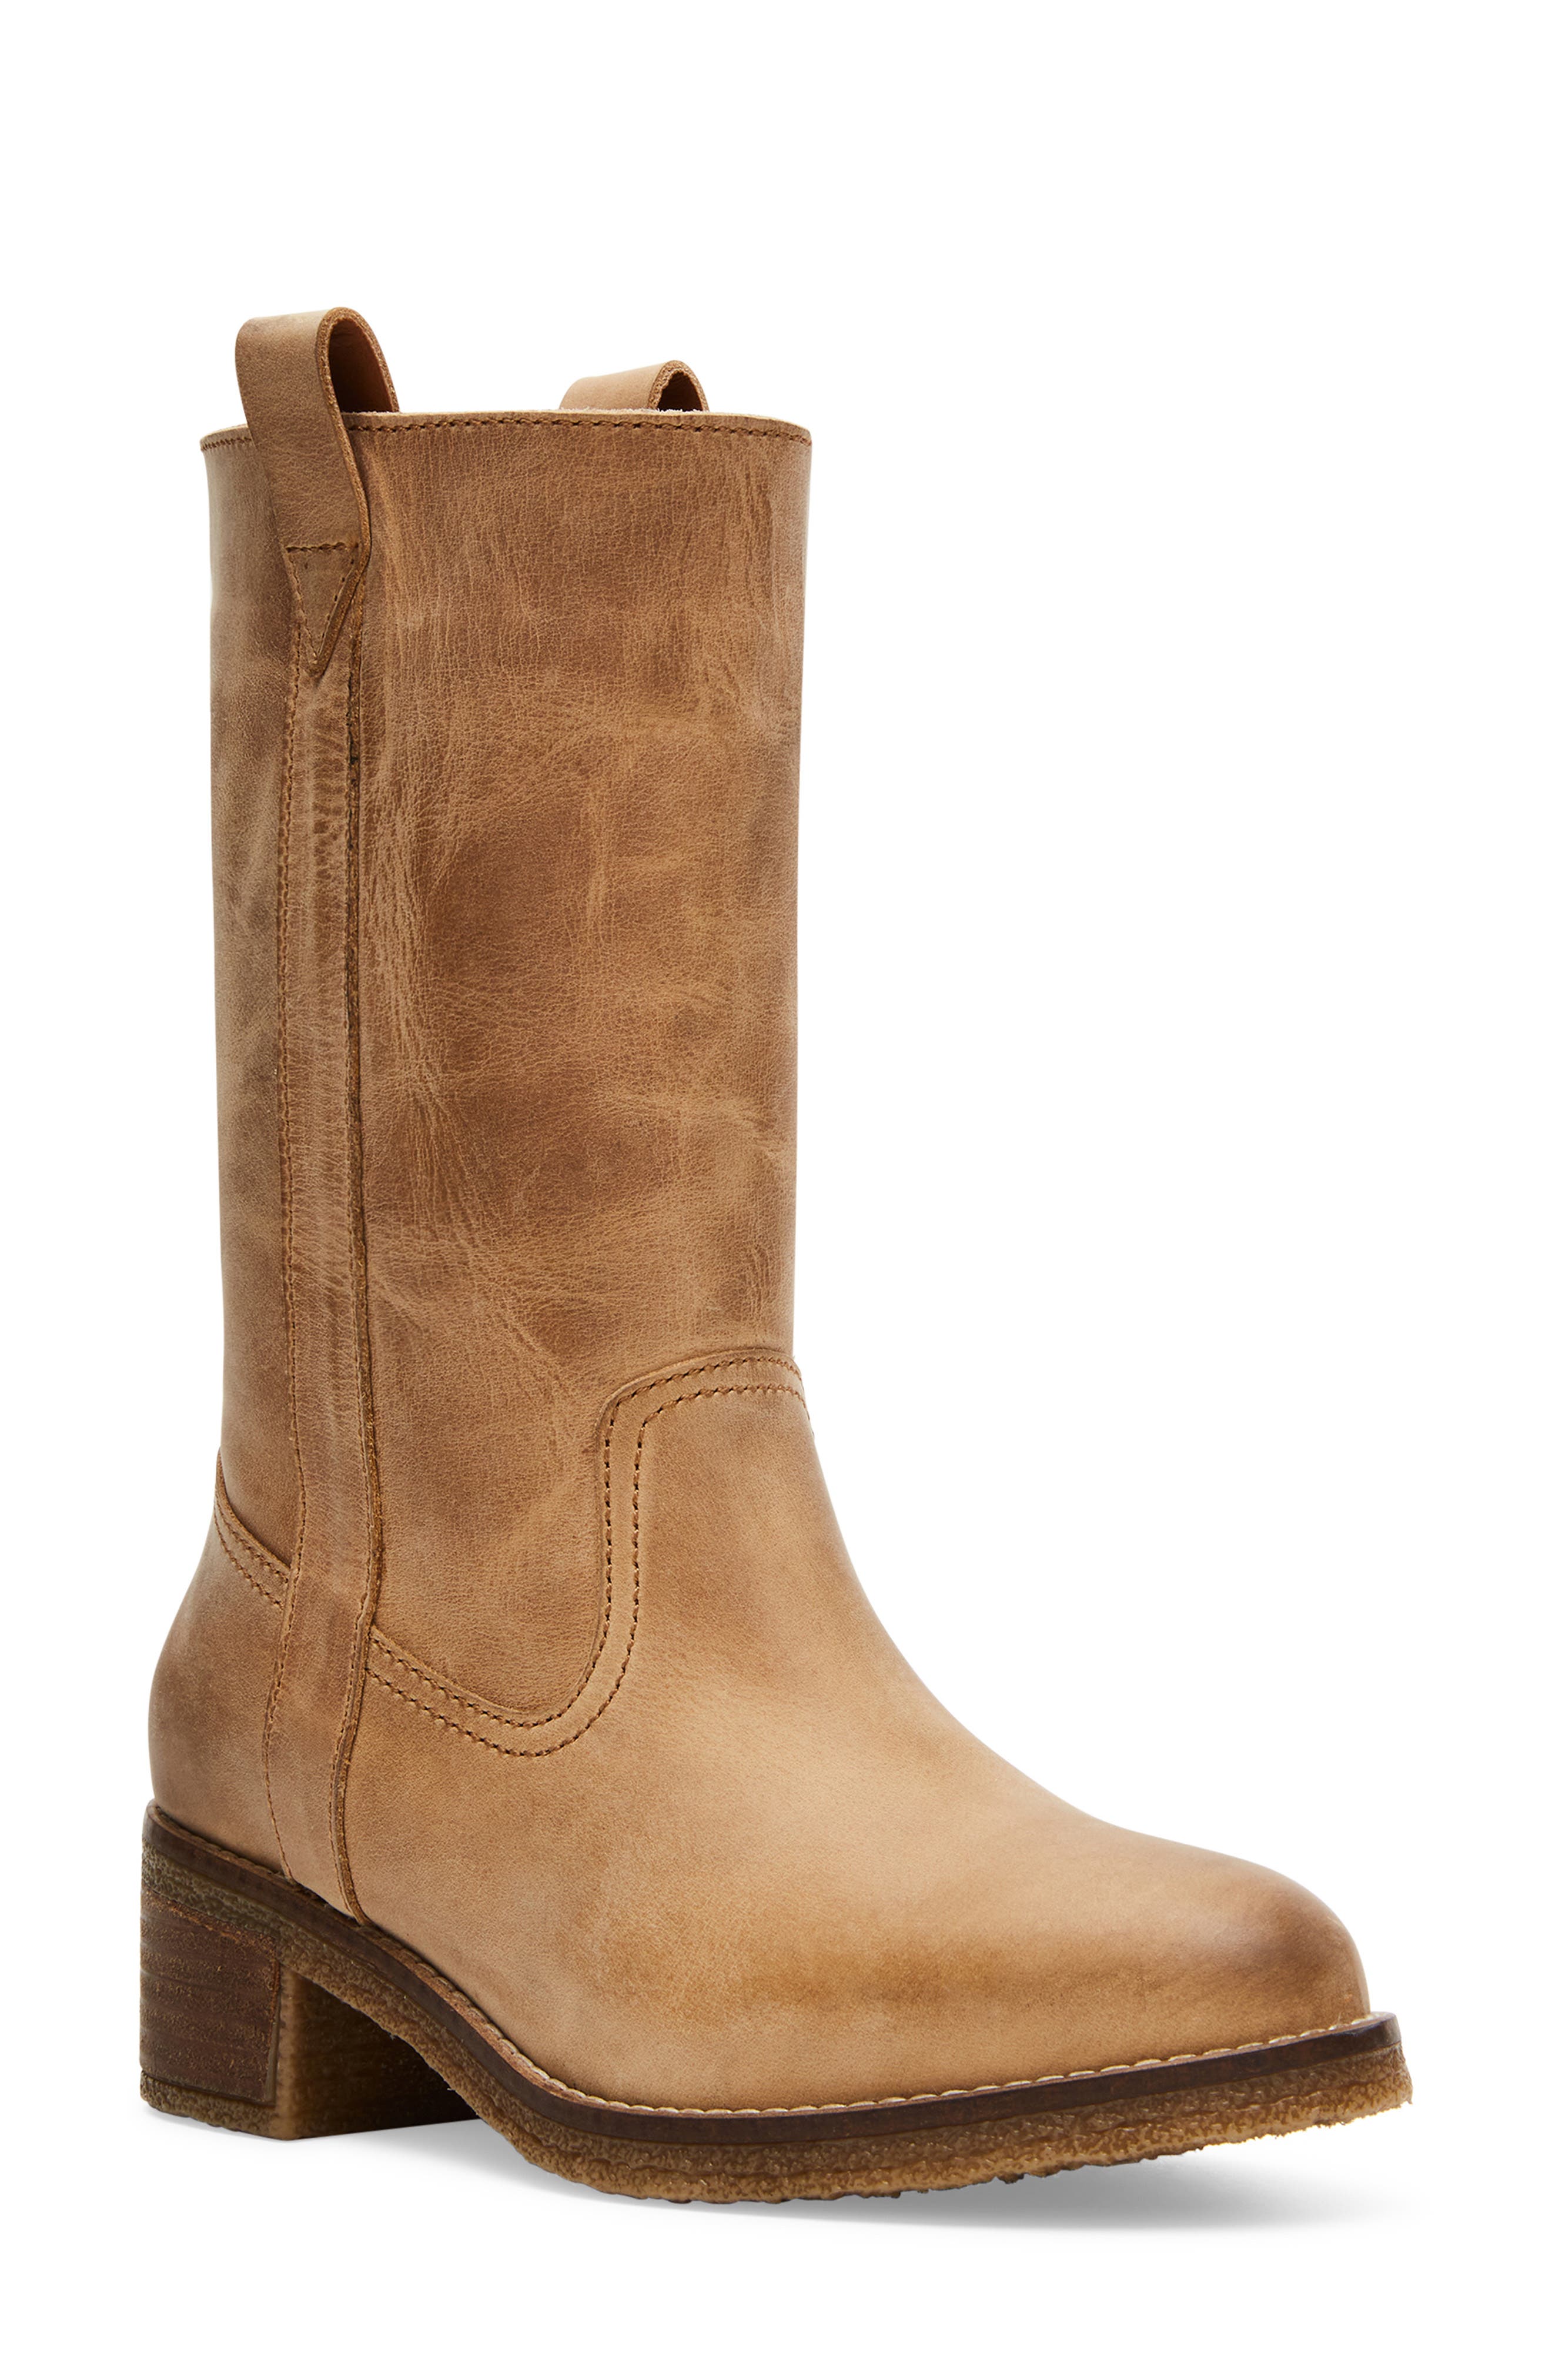 Women's Leather Genuine Mid Calf Boots   Nordstrom